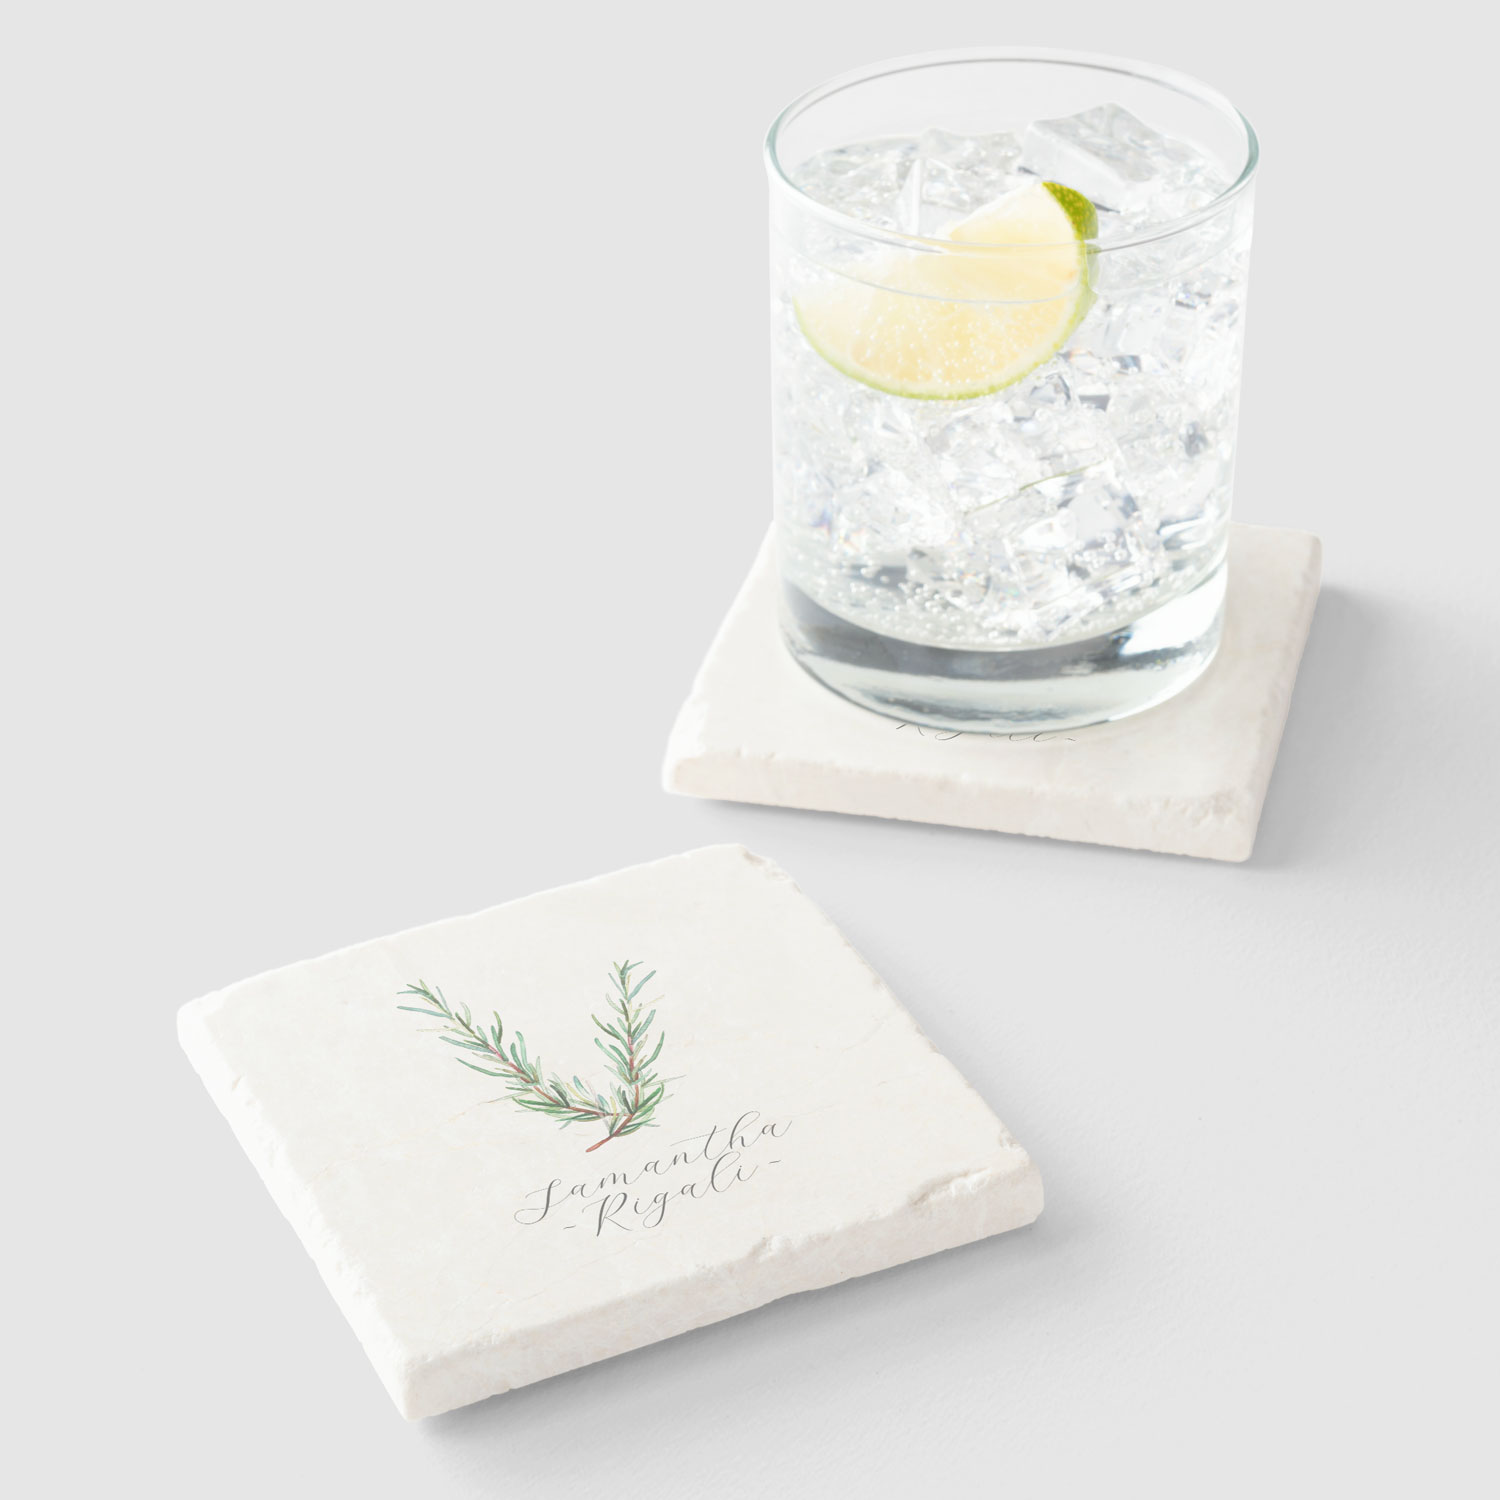 Rustic wedding theme favors personalized stone coasters. Click to shop.